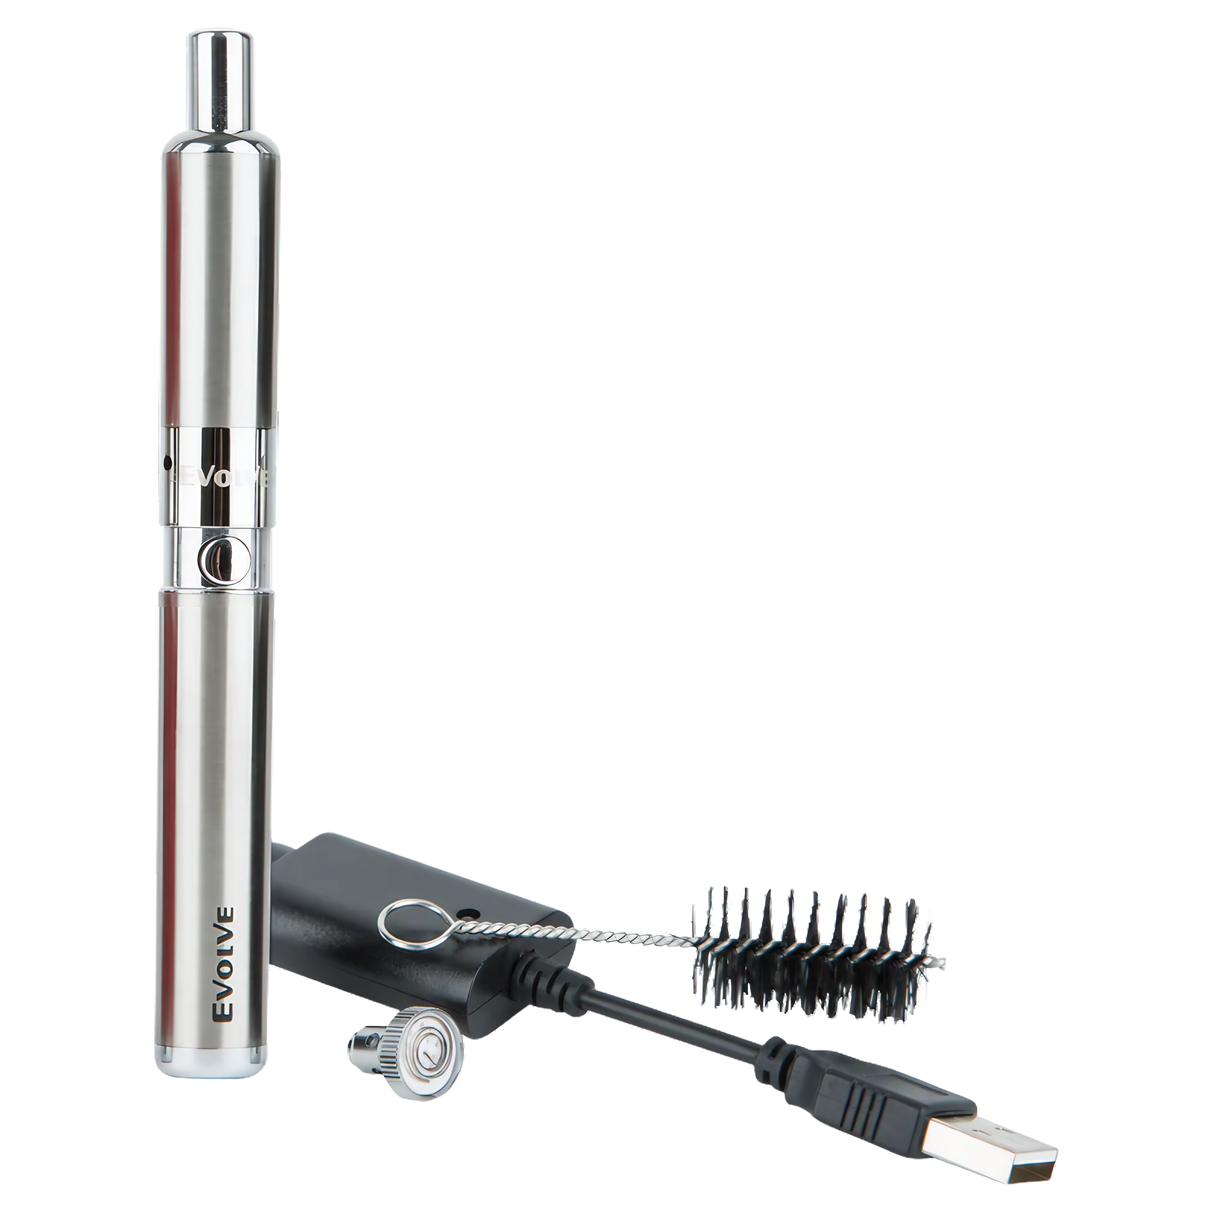 Yocan Evolve-D Dry Herb Vaporizer in Silver, Front View with USB Charger